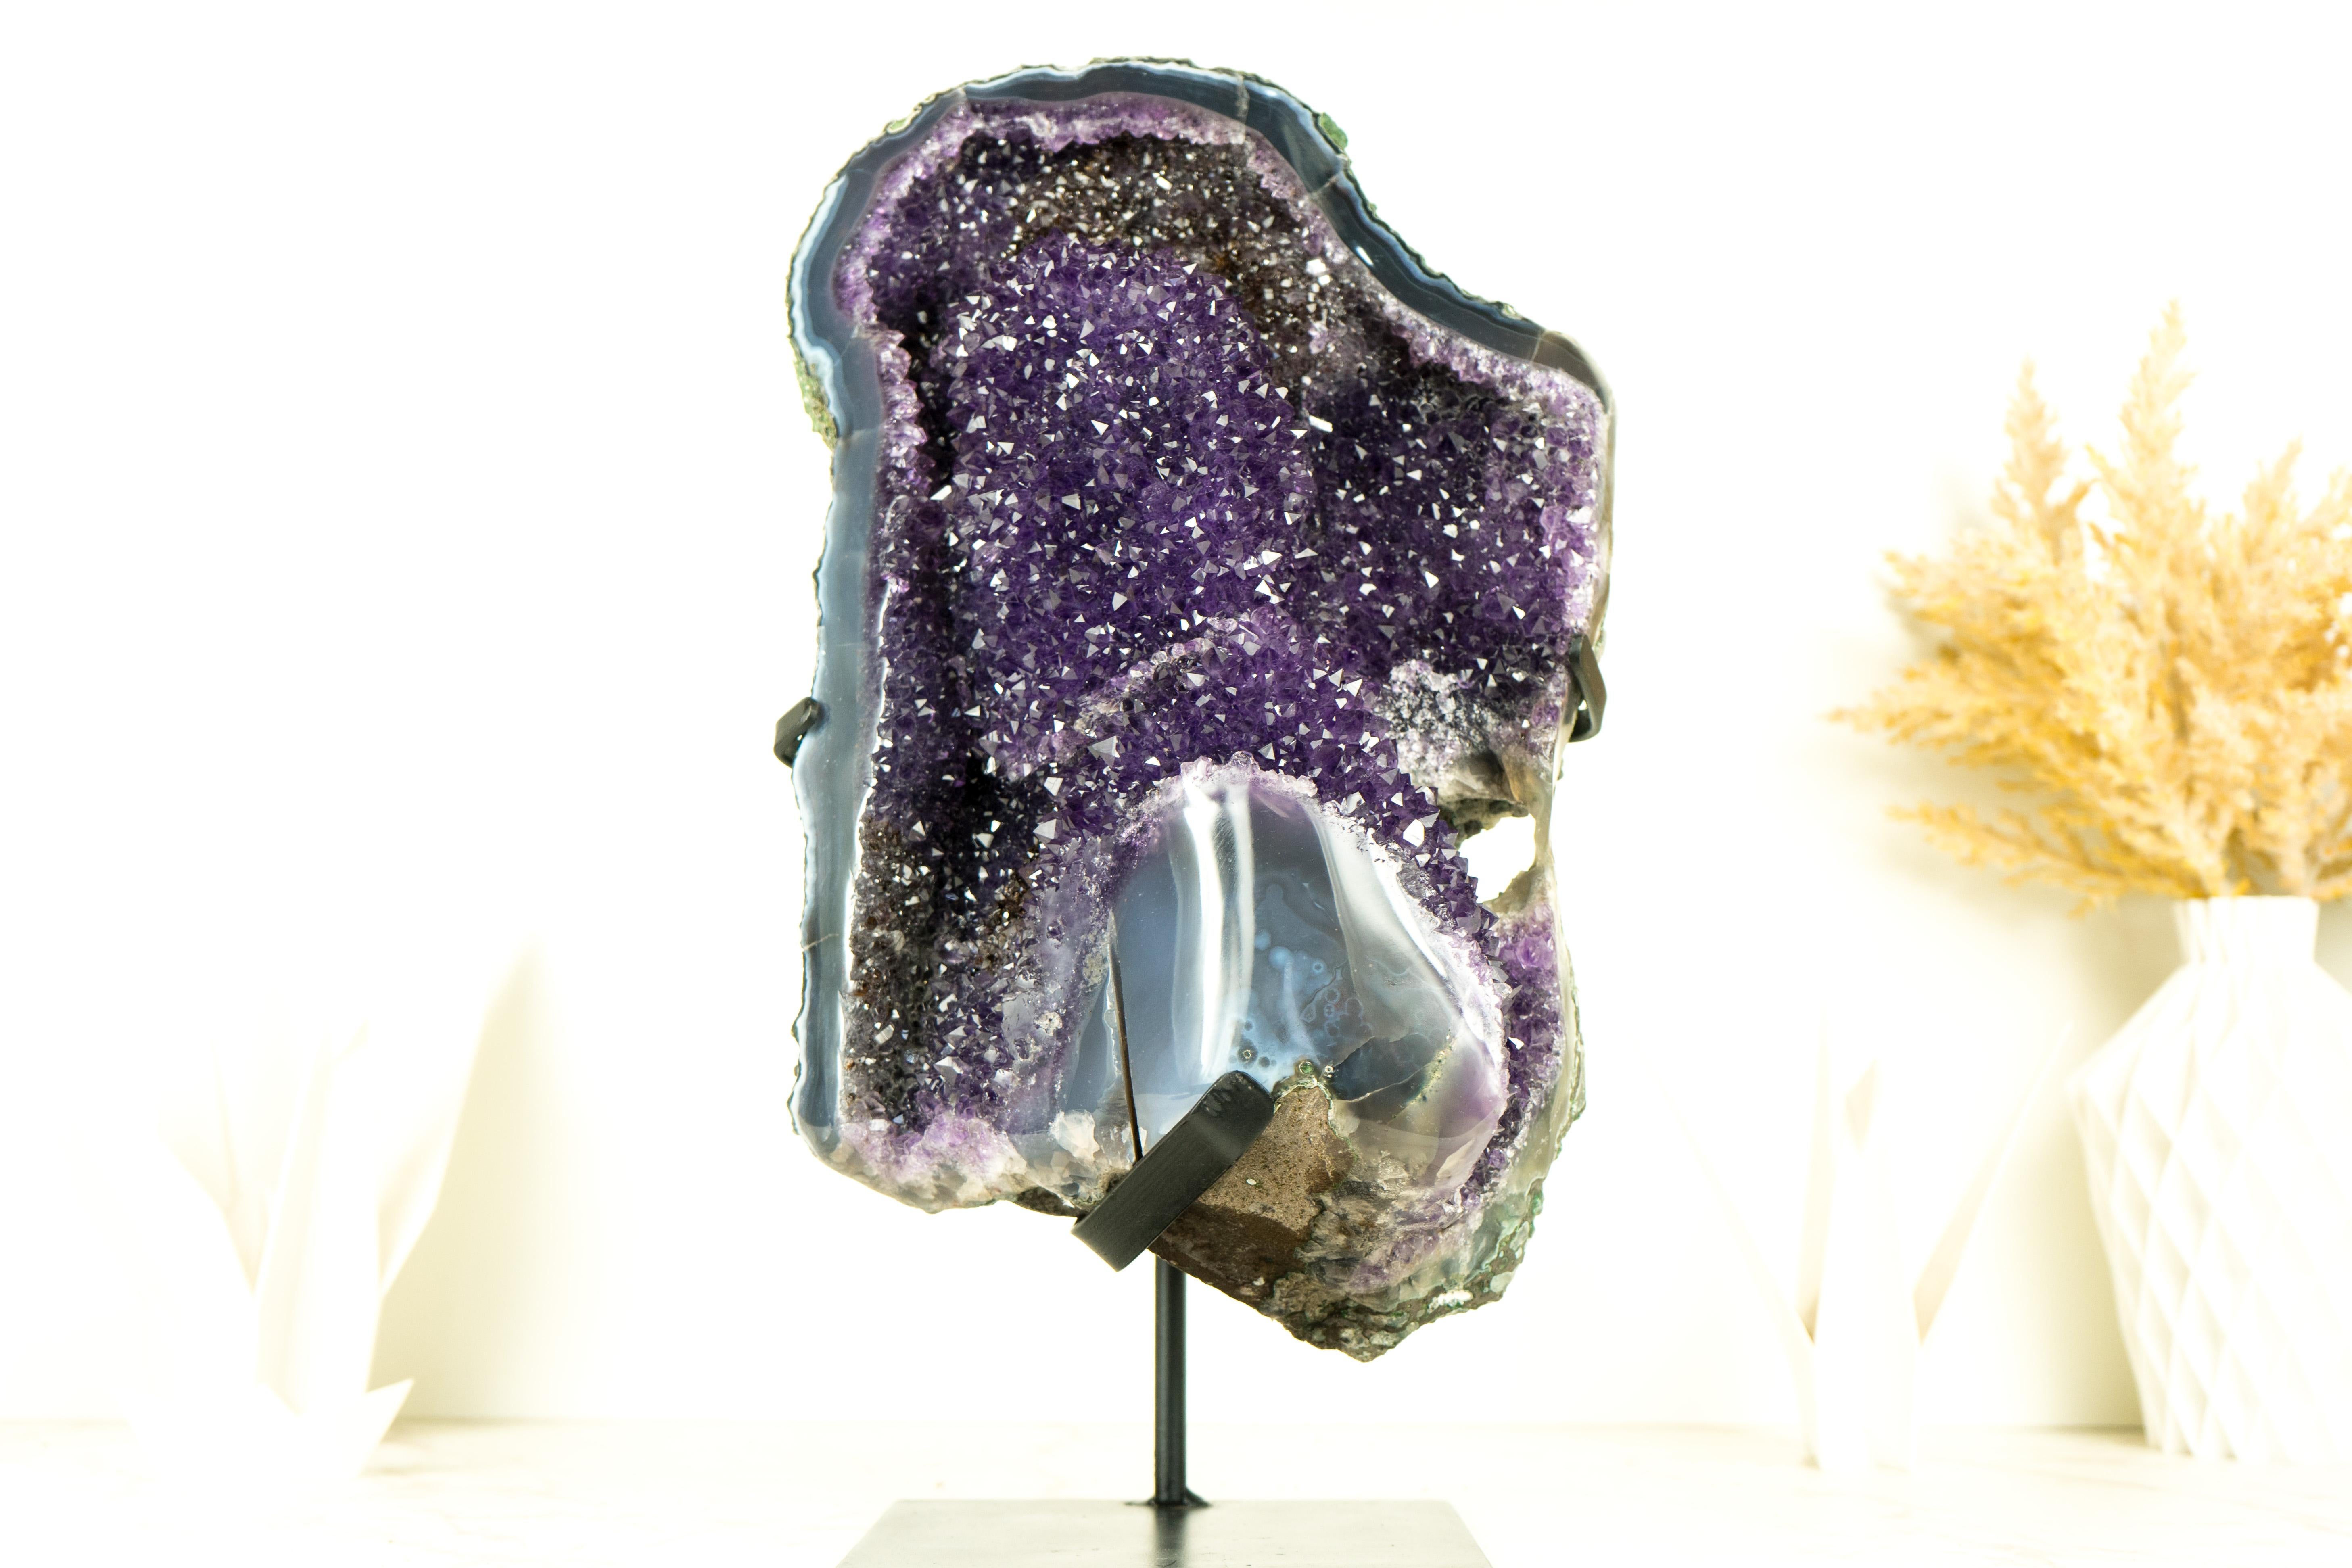 A natural spectacle, this Galaxy Amethyst Geode is art in the form of crystal. The Deep Purple Galaxy Amethyst Druzy contrasts beautifully with the ocean-blue lace agate, giving rise to a one-of-a-kind, world-class Amethyst Geode. A mineral